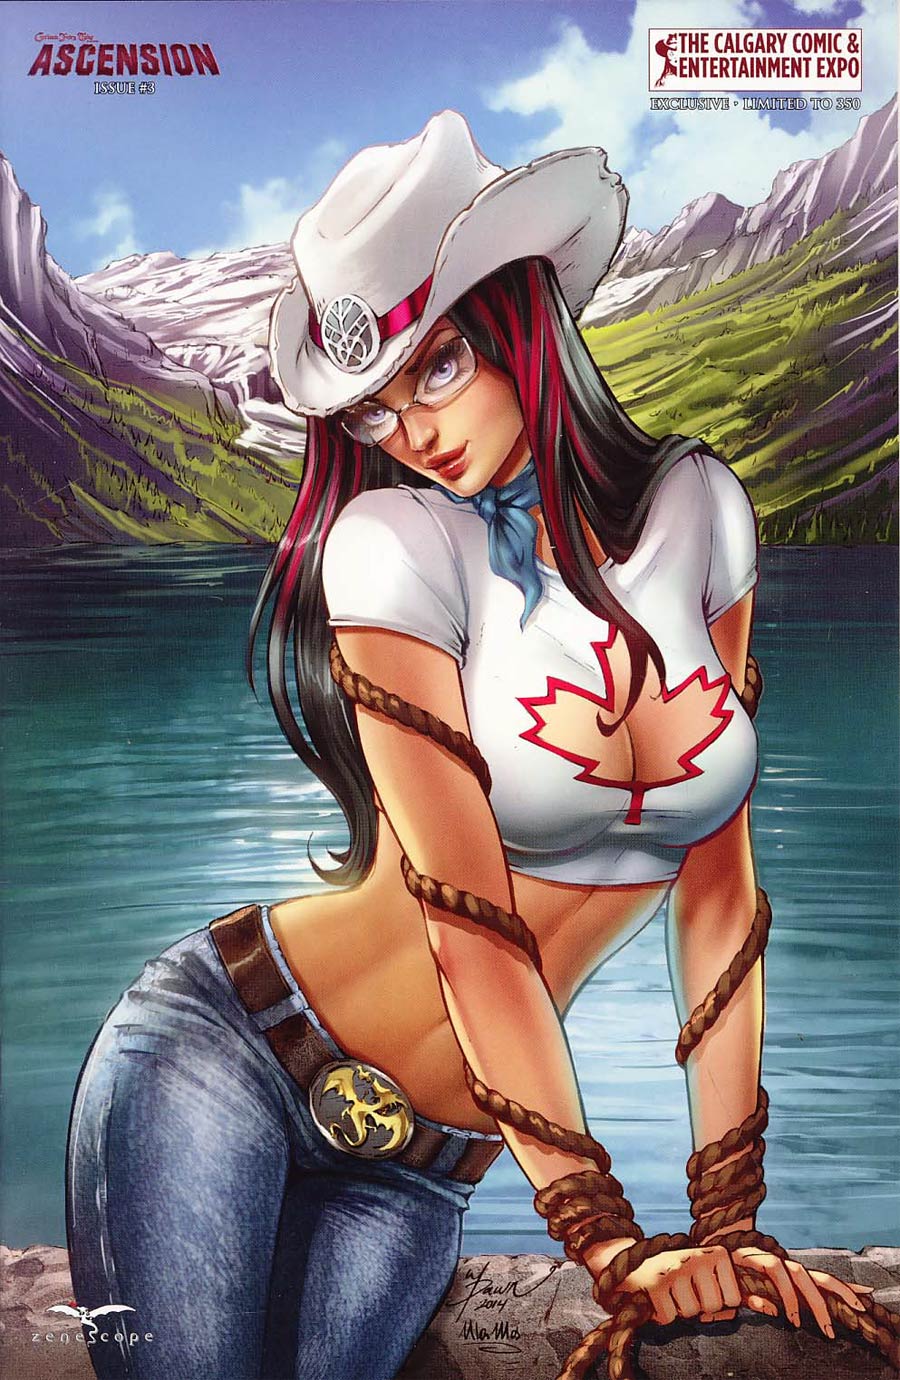 Grimm Fairy Tales Presents Ascension #3 Cover D Calgary Comic Con Exclusive Dawn McTeigue Variant Cover